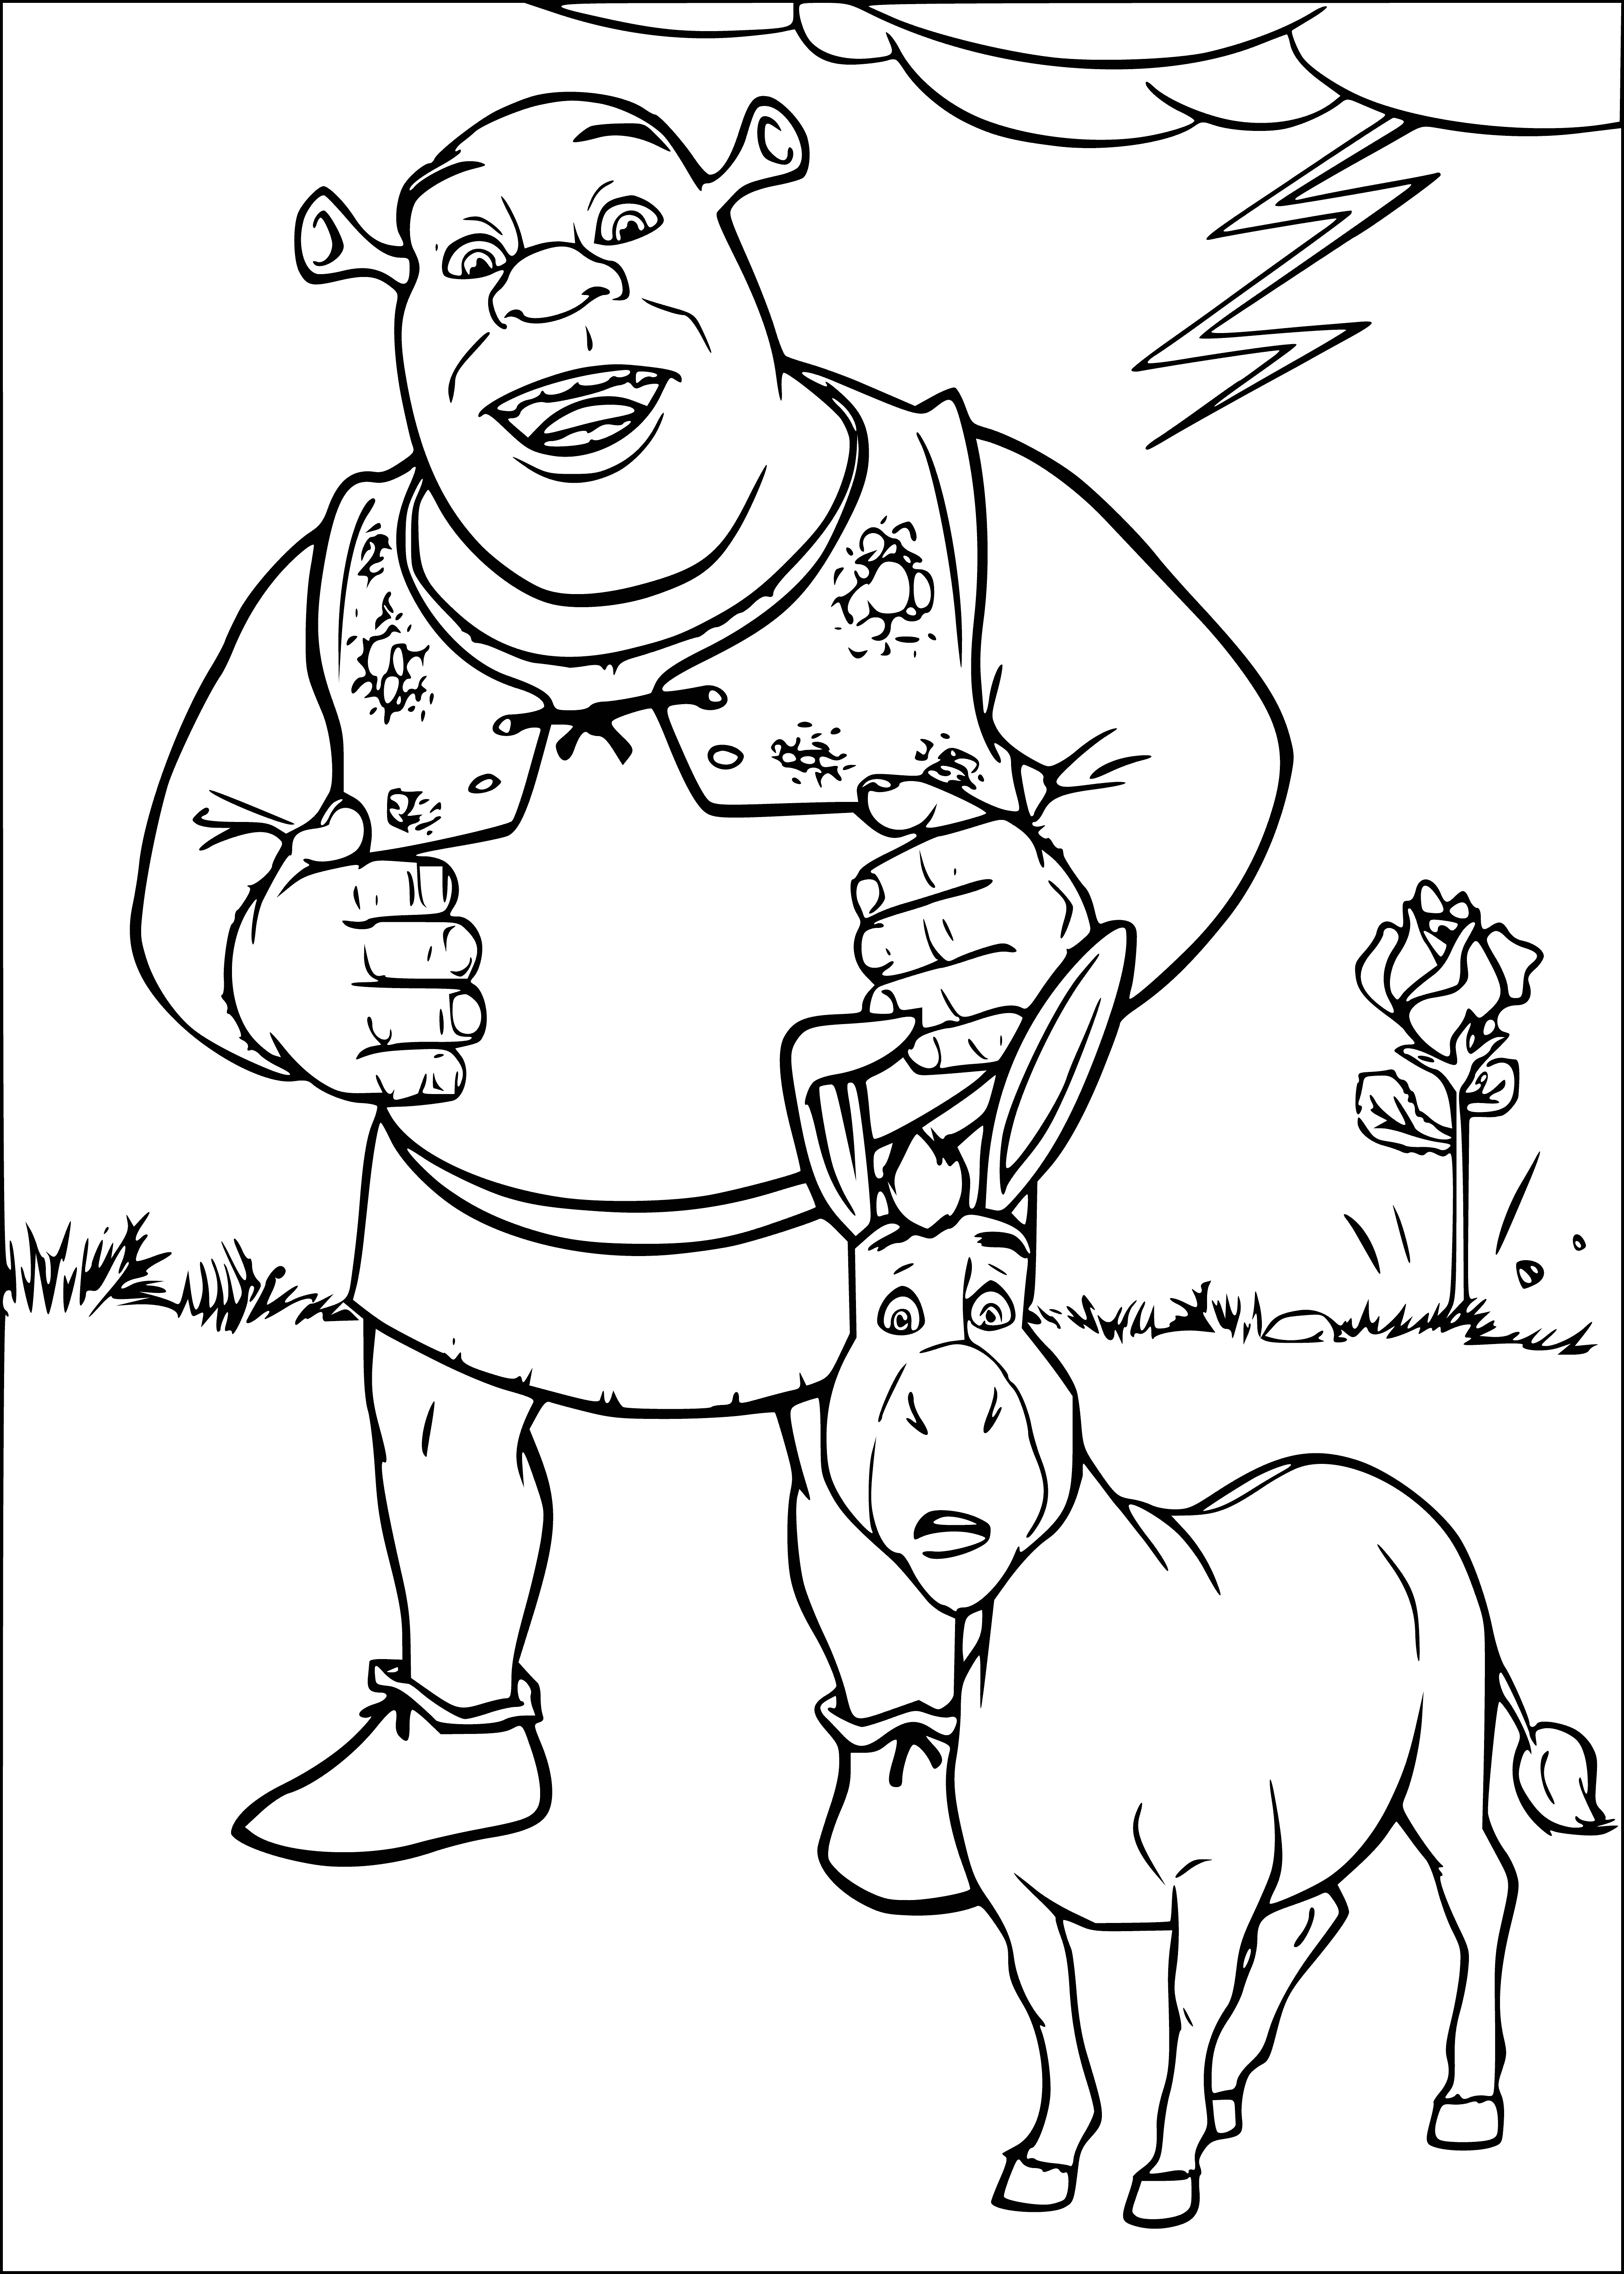 coloring page: Shrek is a large, green ogre holding a brown donkey by the reins. He's wearing brown trousers, vest and boots. Donkey has large, brown eyes and a long, brown tail.